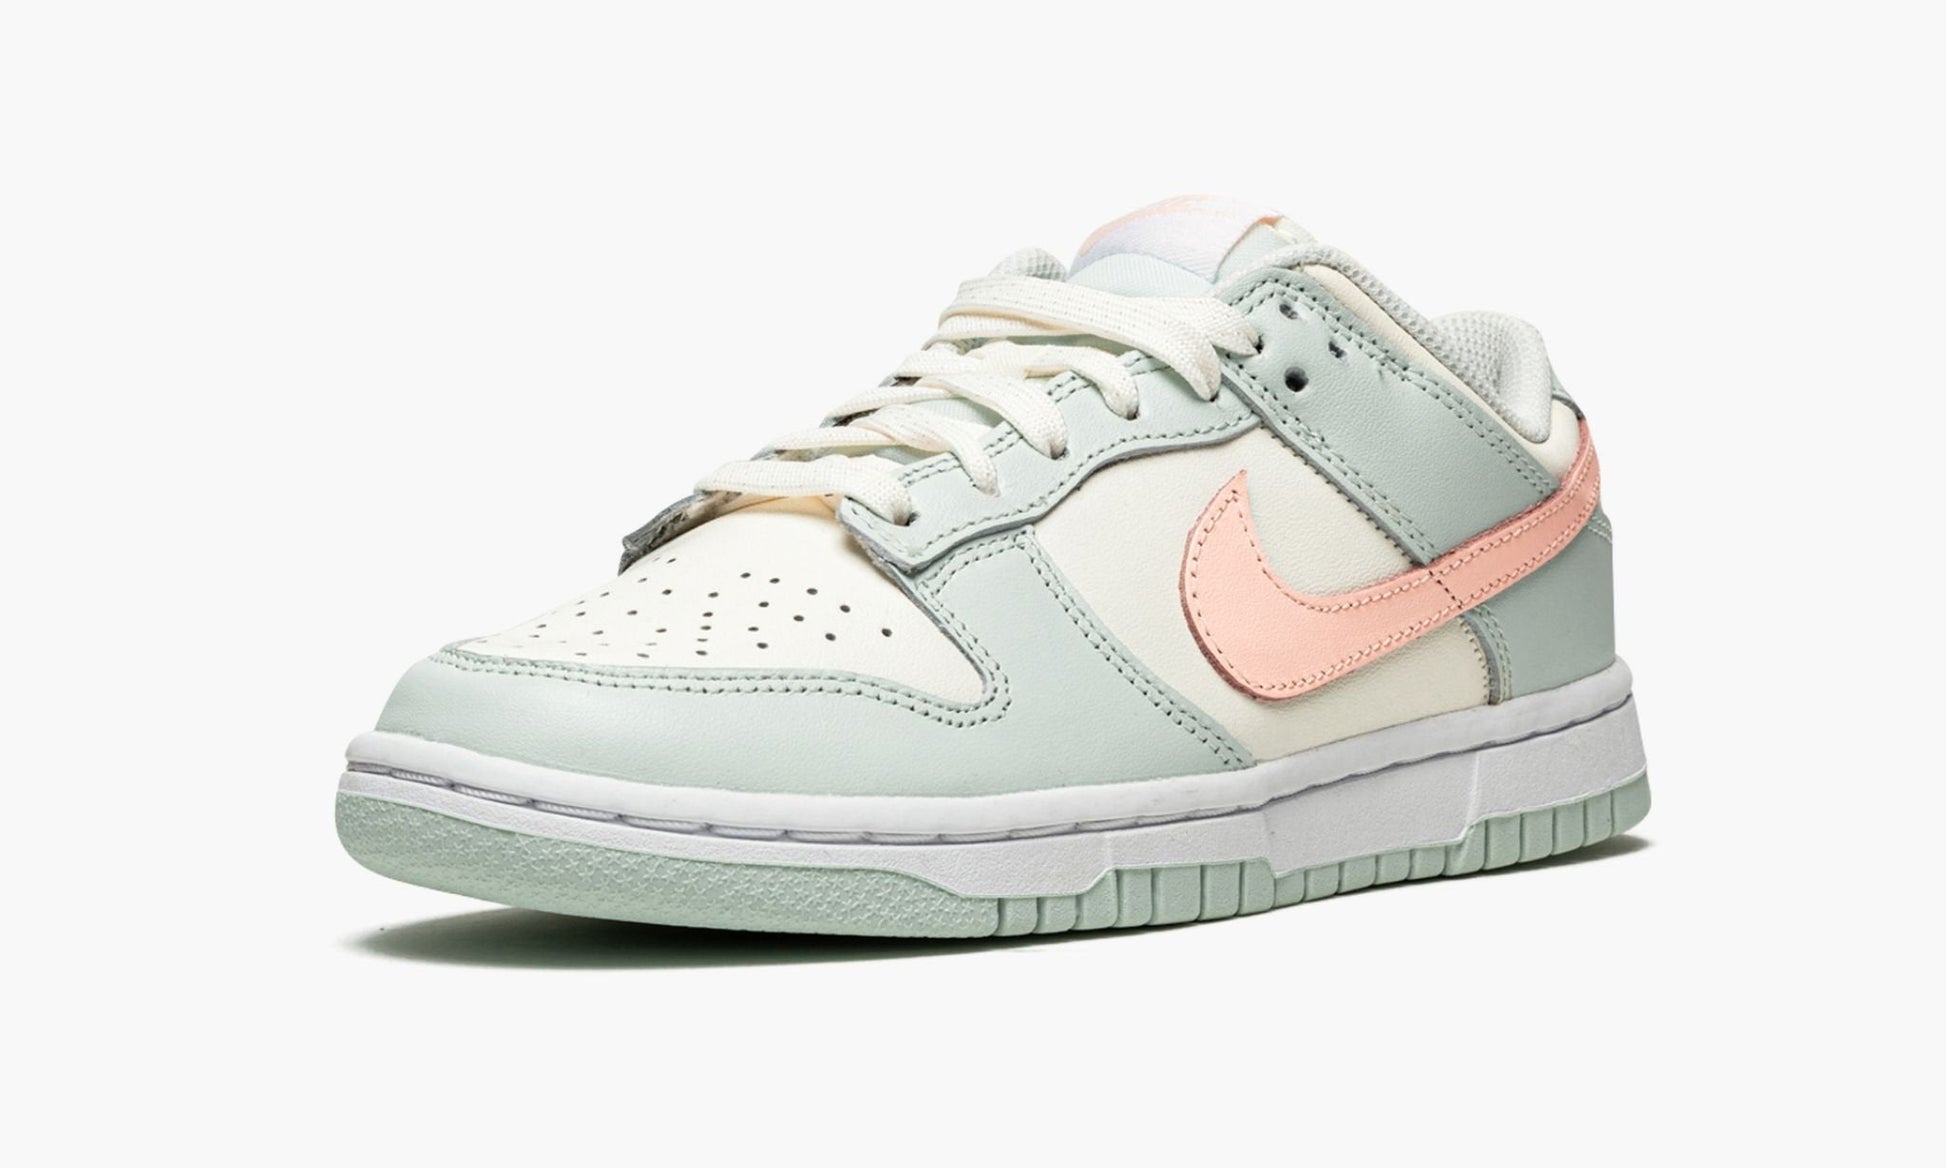 Dunk Low WMNS "Barely Green"